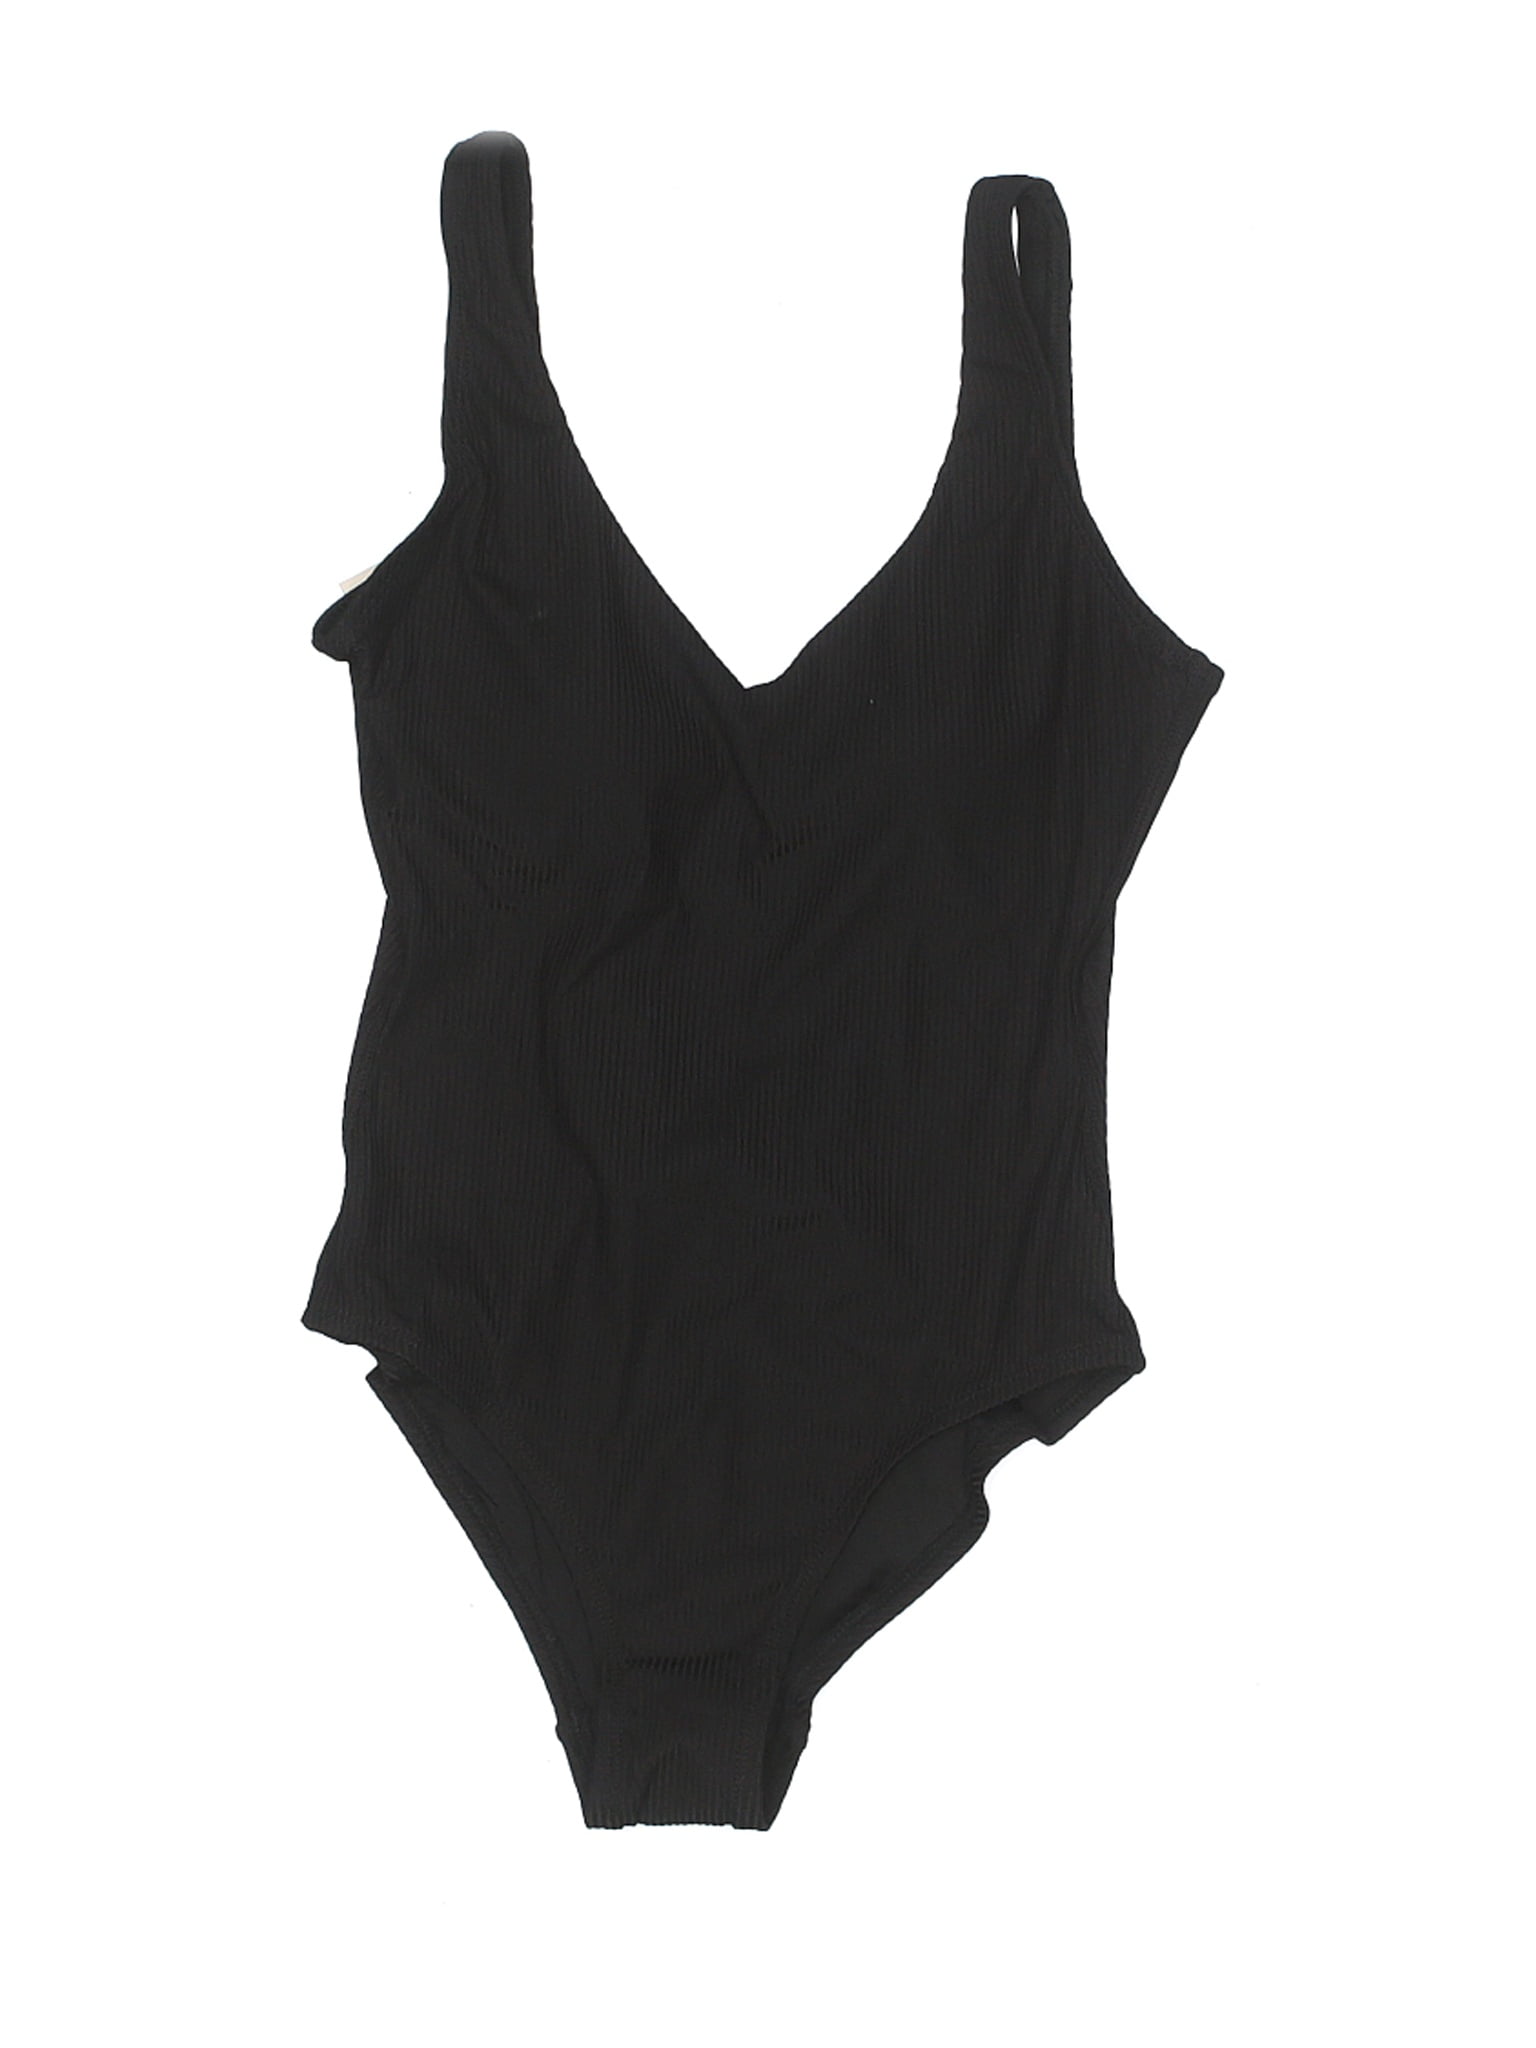 Andie - Pre-Owned Andie Women's Size S One Piece Swimsuit - Walmart.com ...